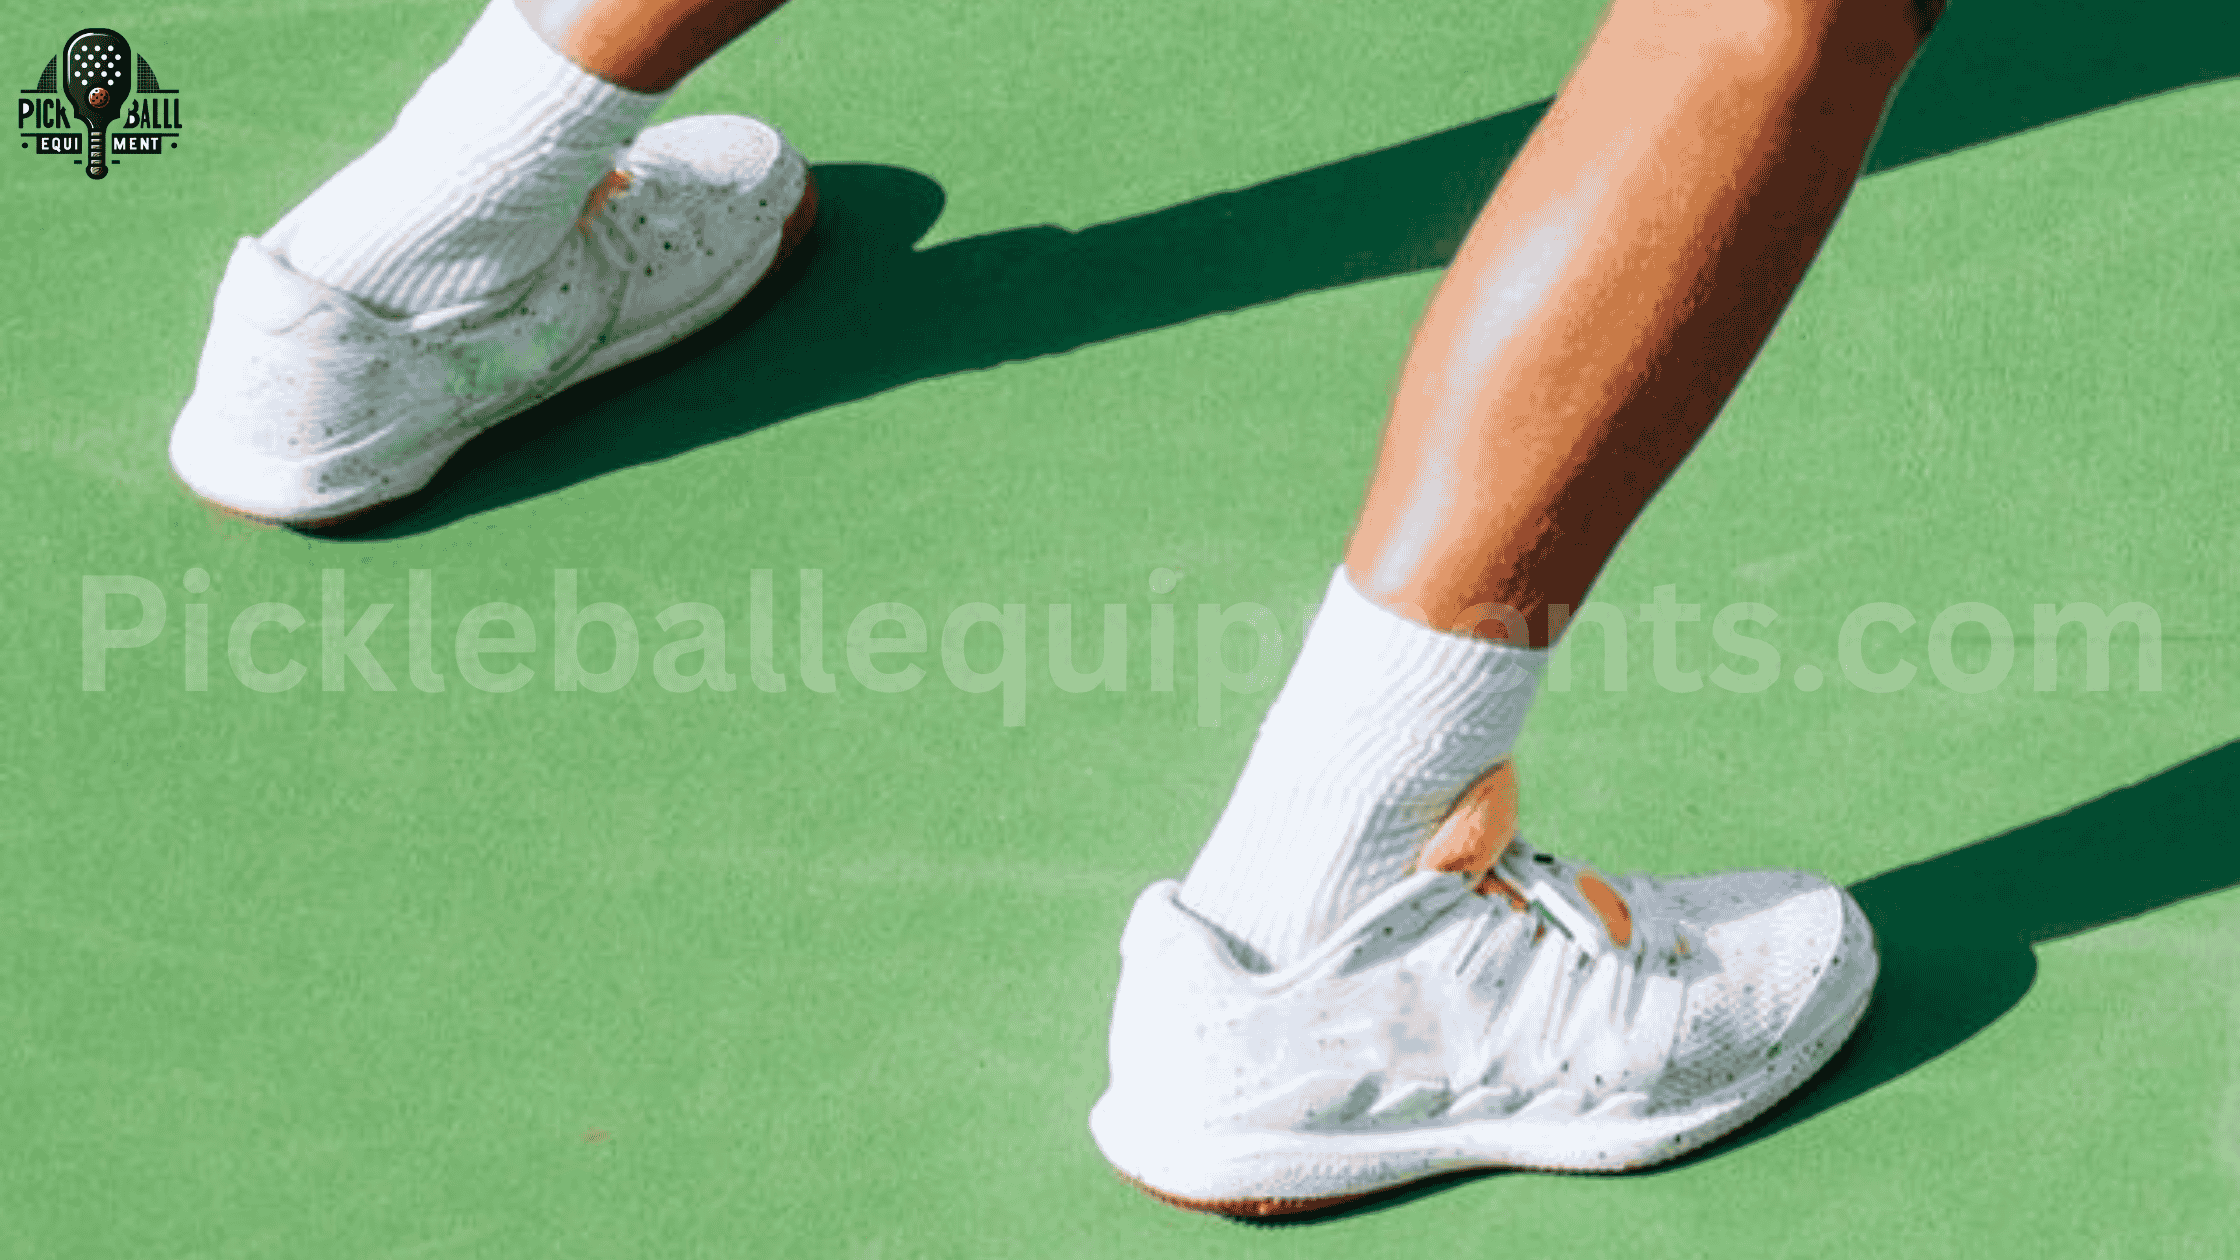 What Are the Qualities of a Good Pickleball Shoe